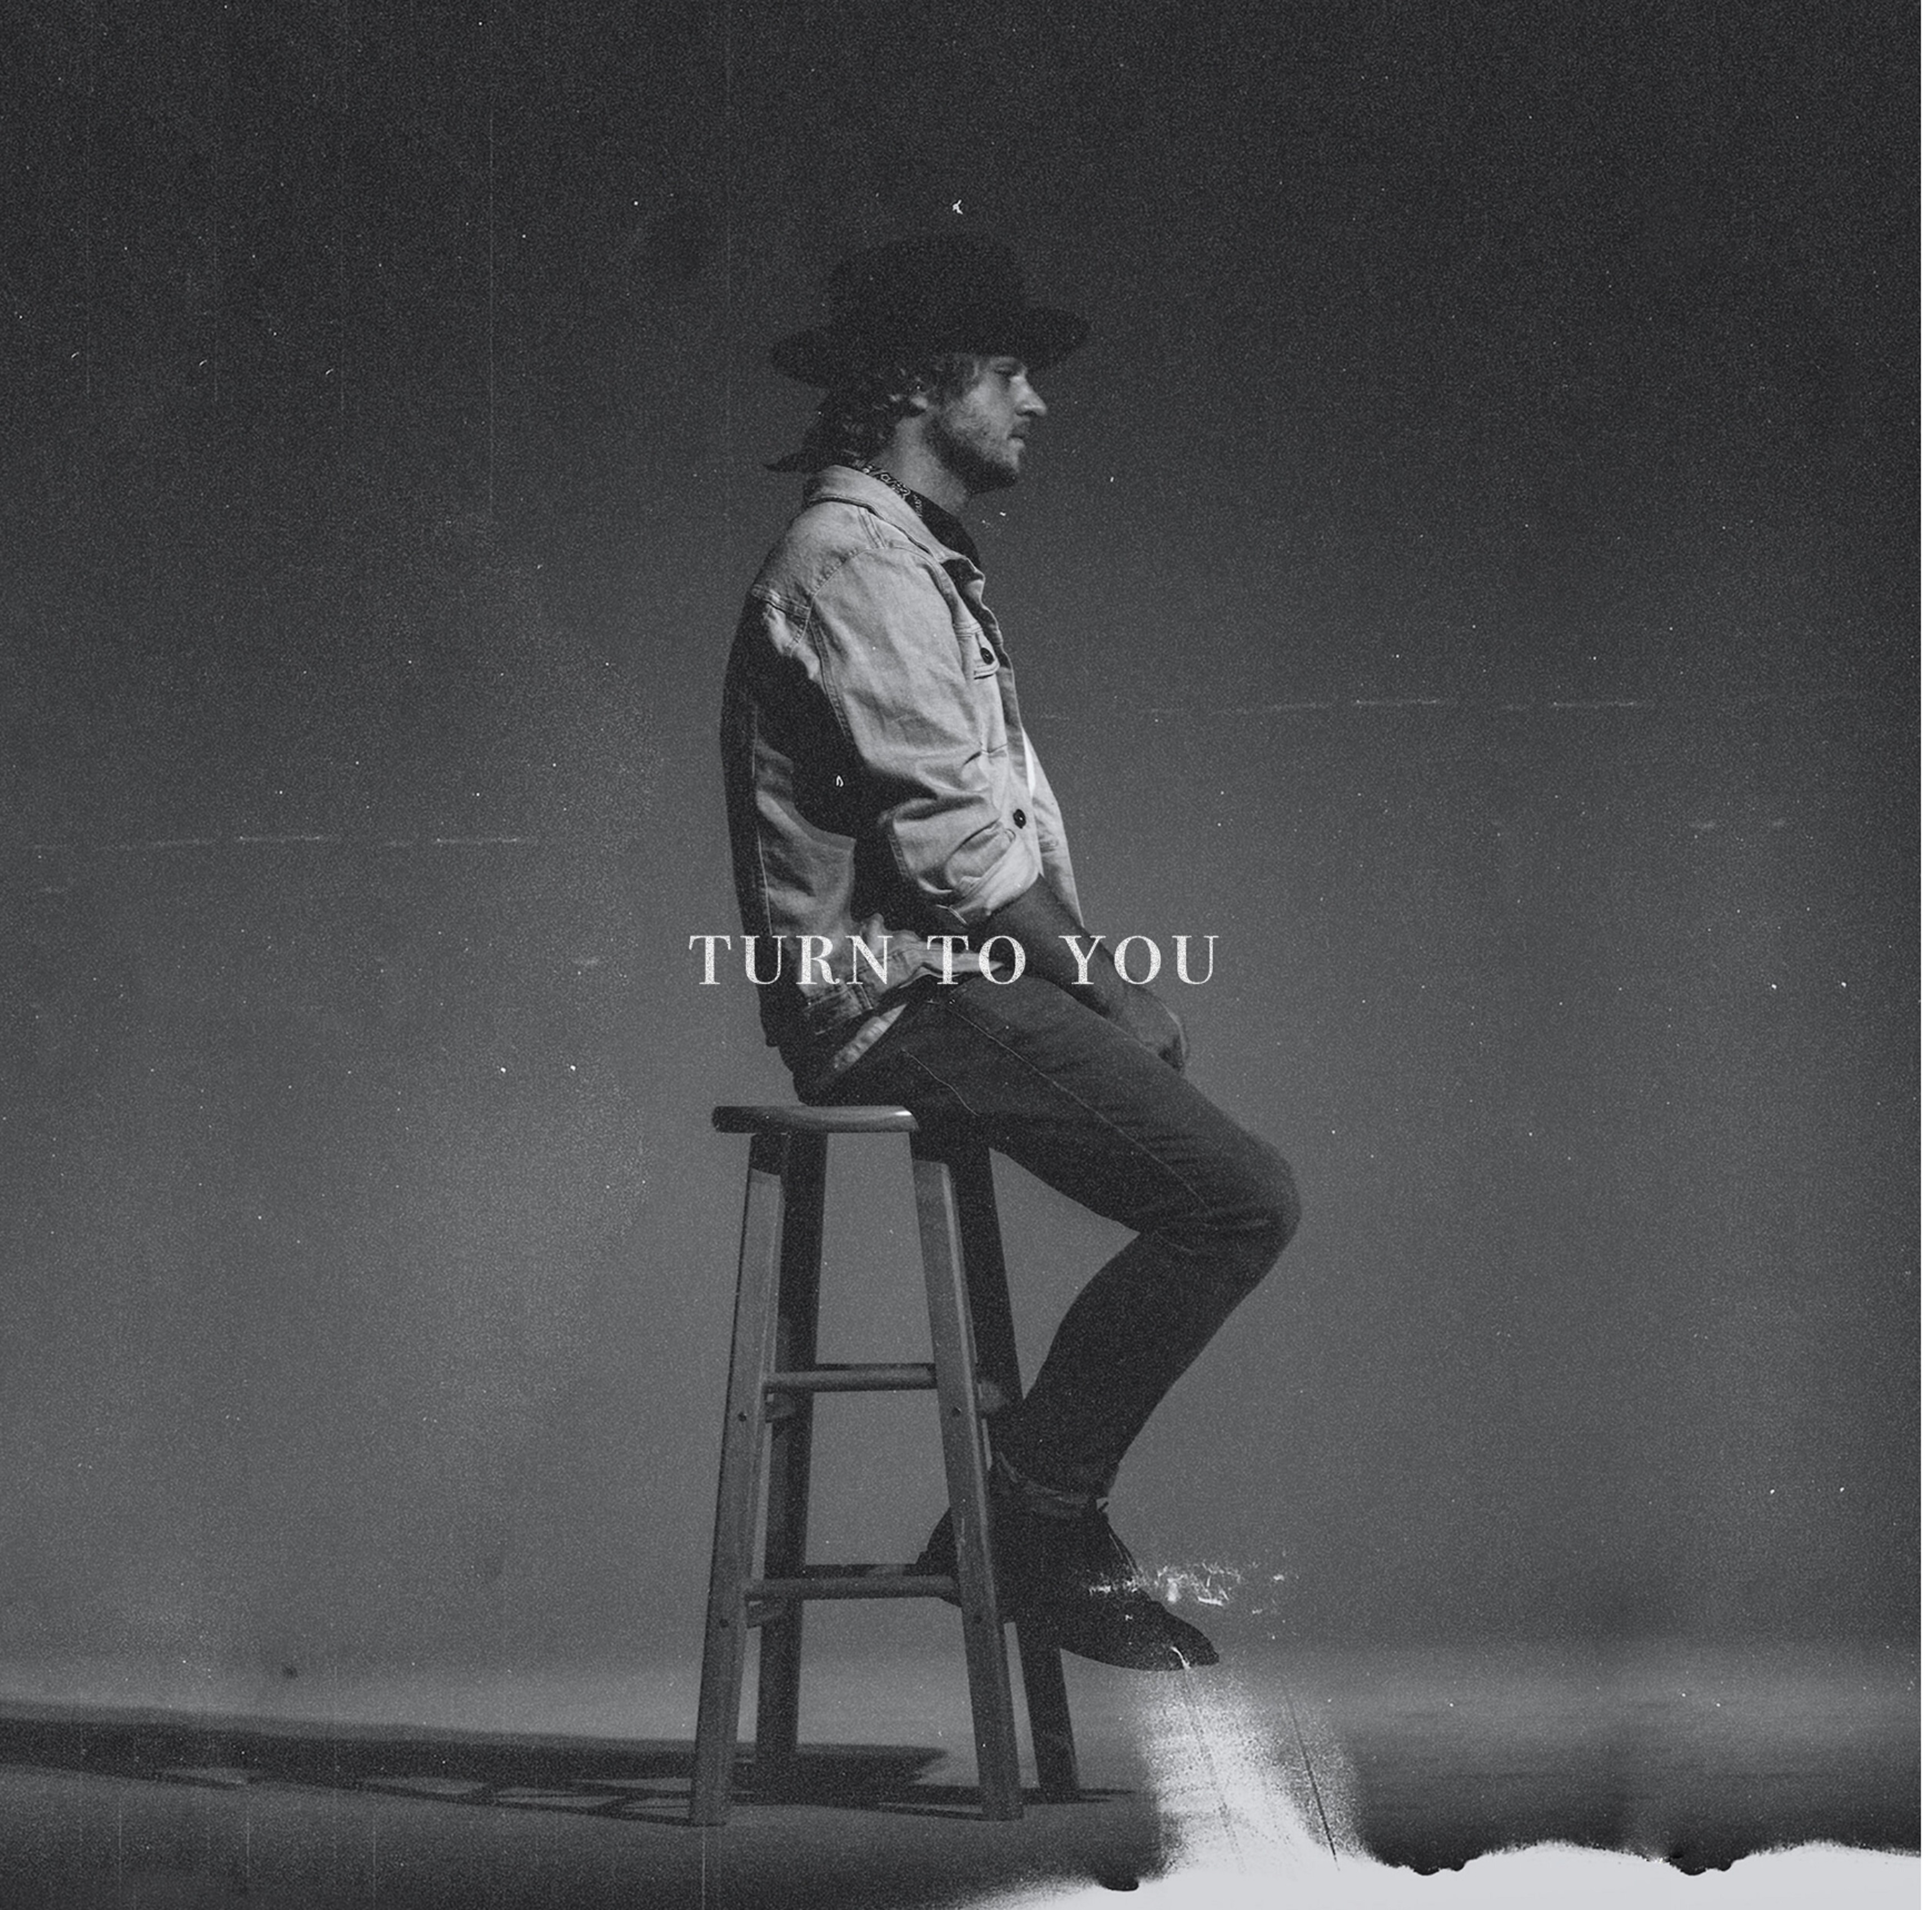 Cole Scheifele Previews New Album With "Turn To You"